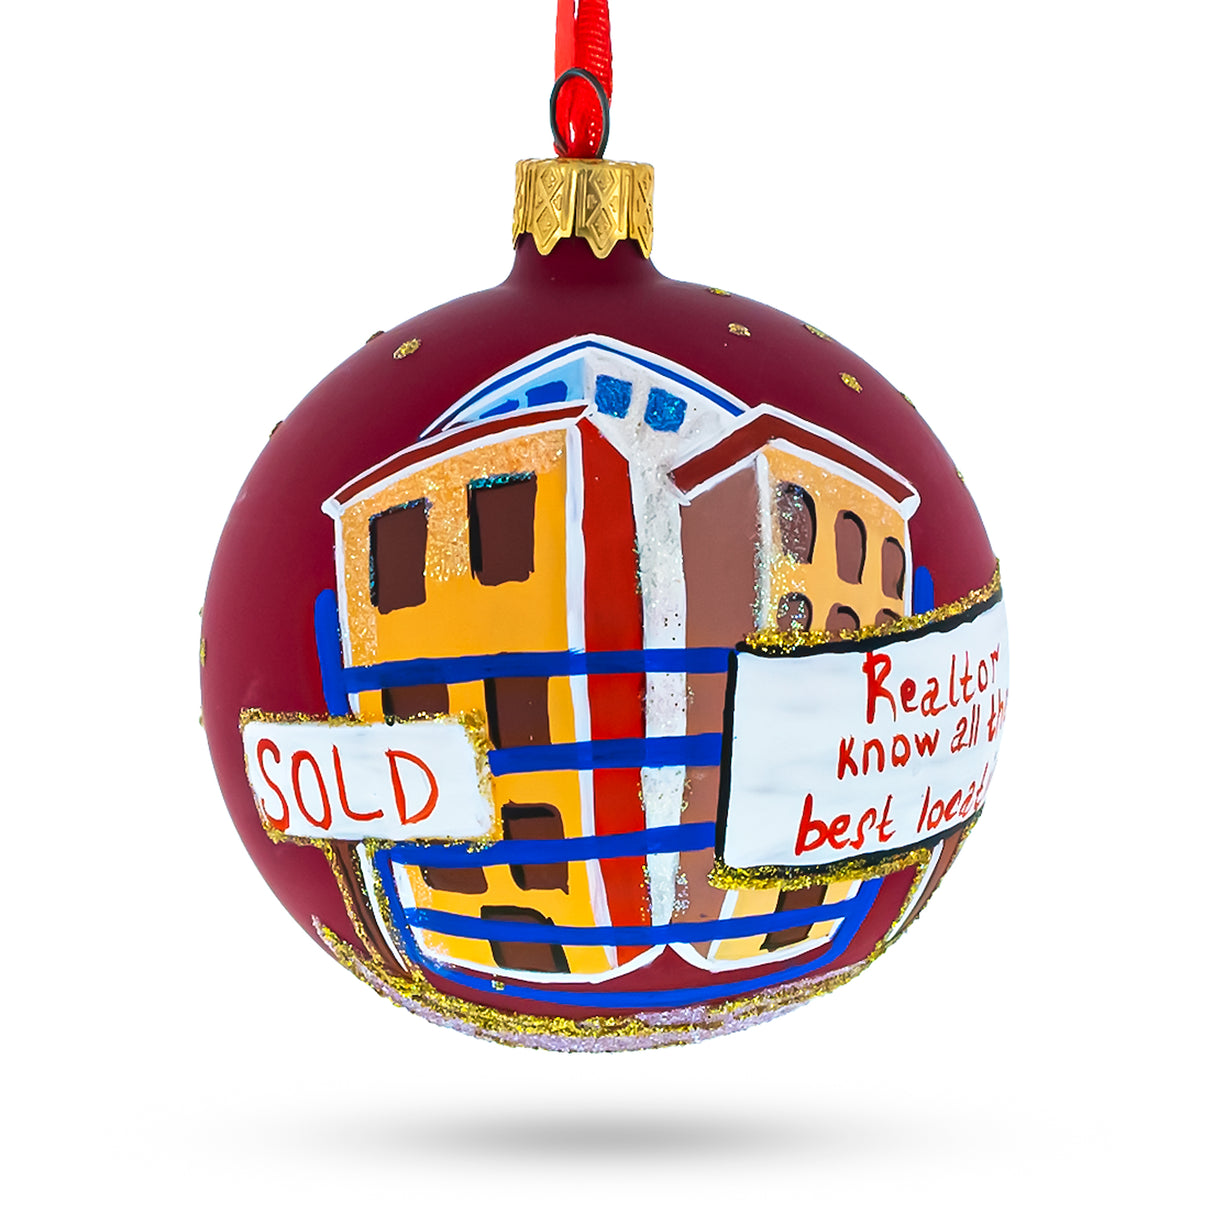 Glass Real Estate Agent Blown Glass Ball Christmas Ornament 3.25 Inches in Red color Round